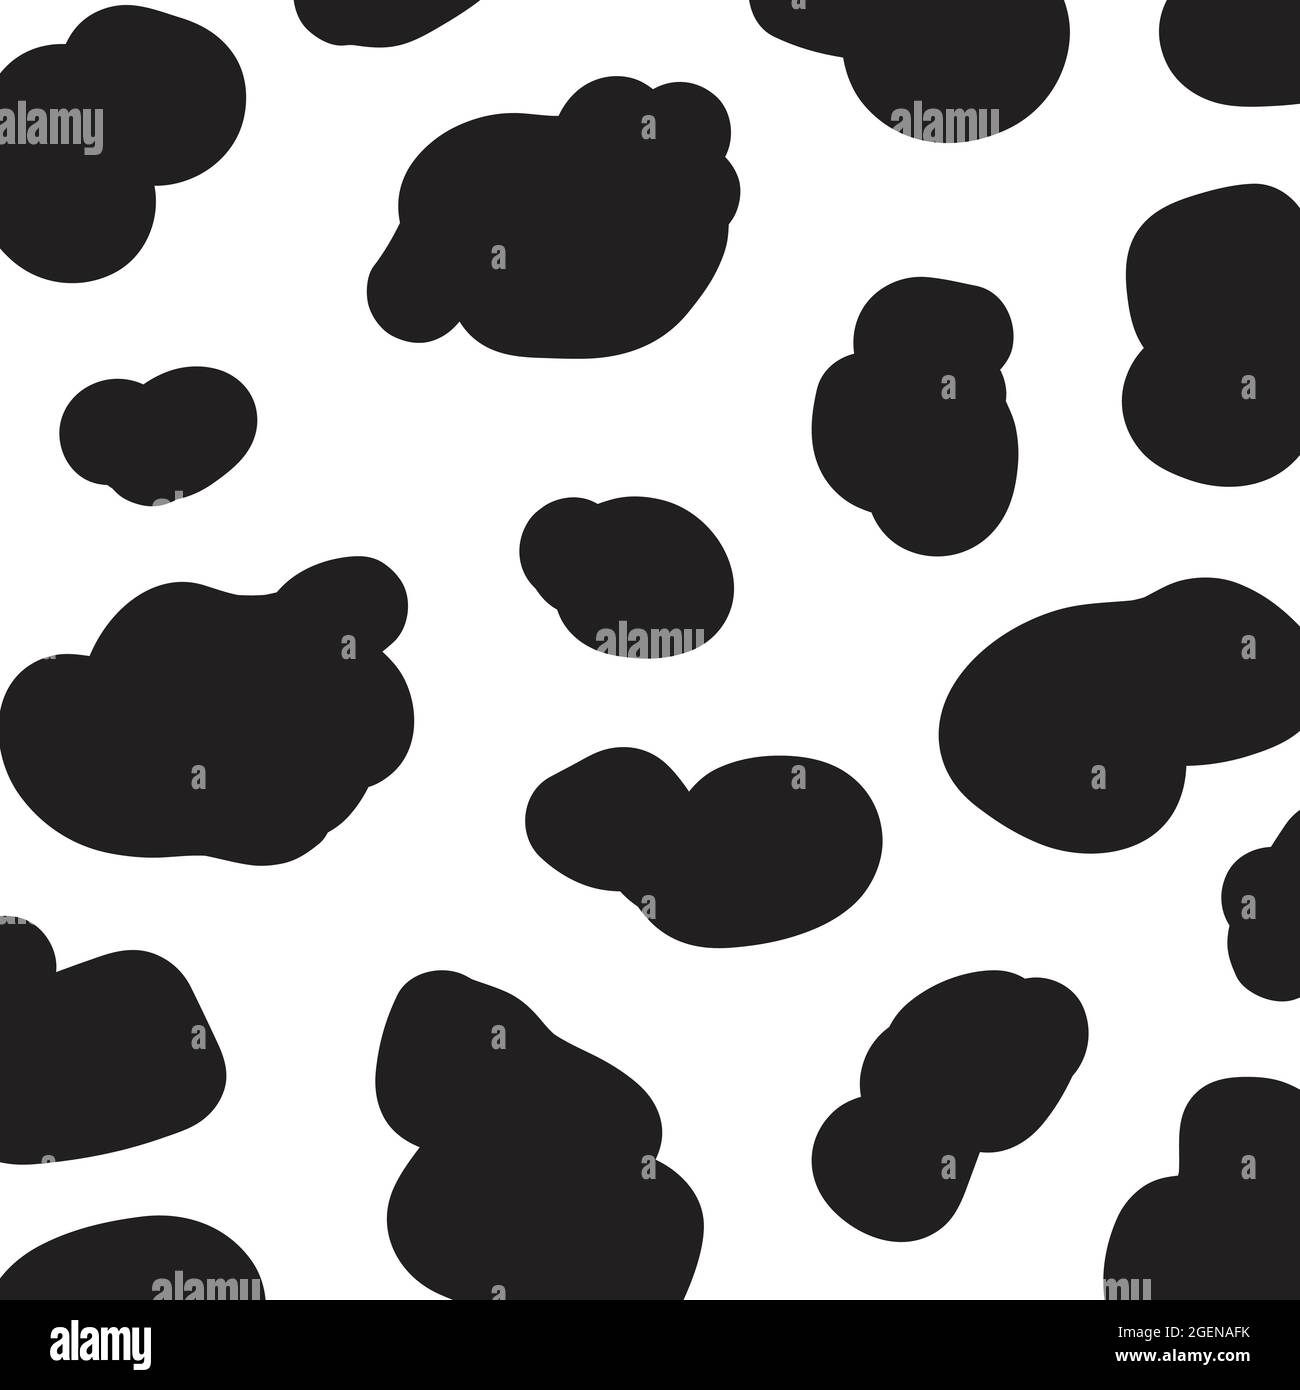 Cow pattern abstract background. Seamless pattern black and white cow skin. Vector illustration for design. Stock Vector